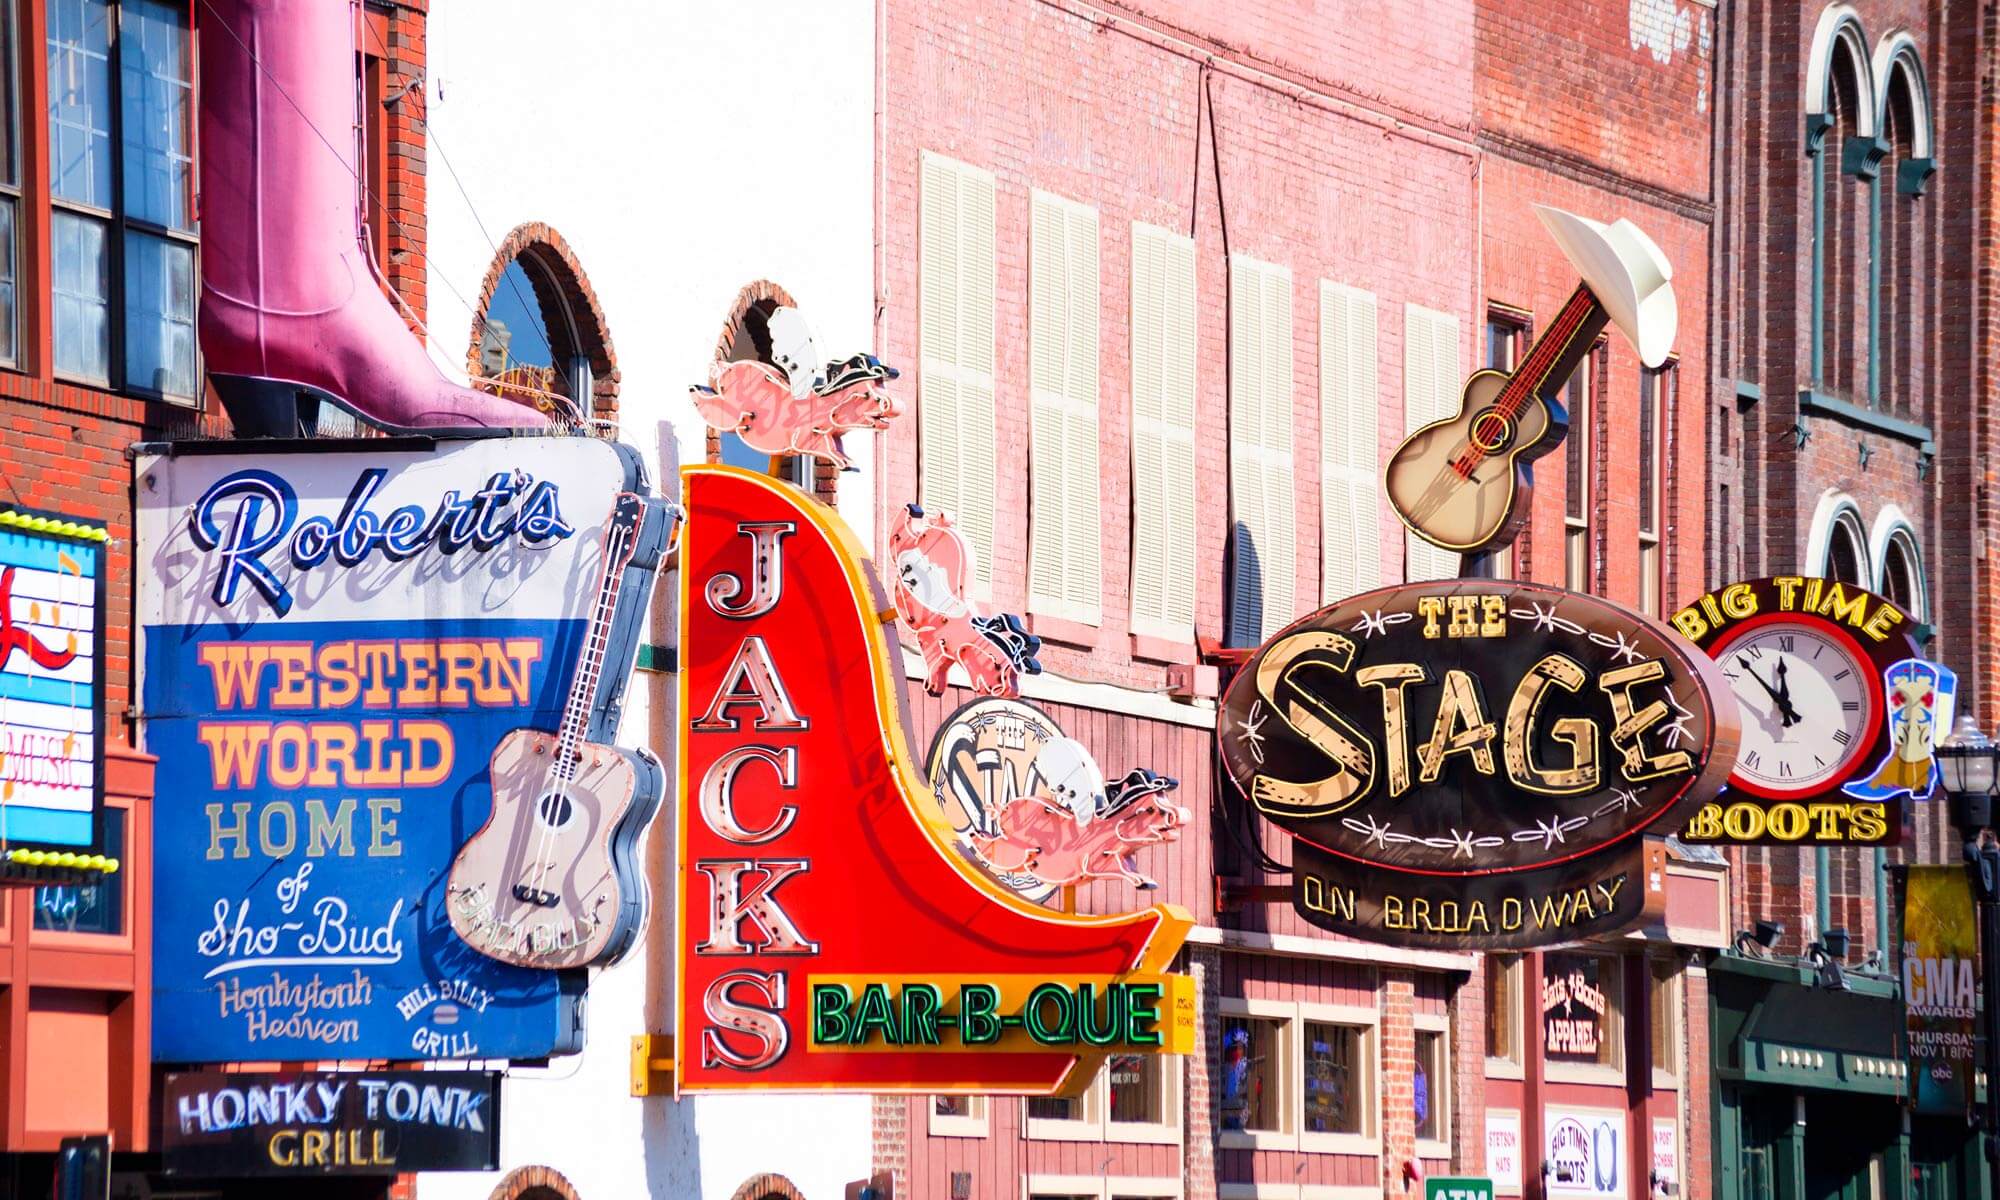 Various neon signs for the venues along Lower Broadway in Nashville, TN